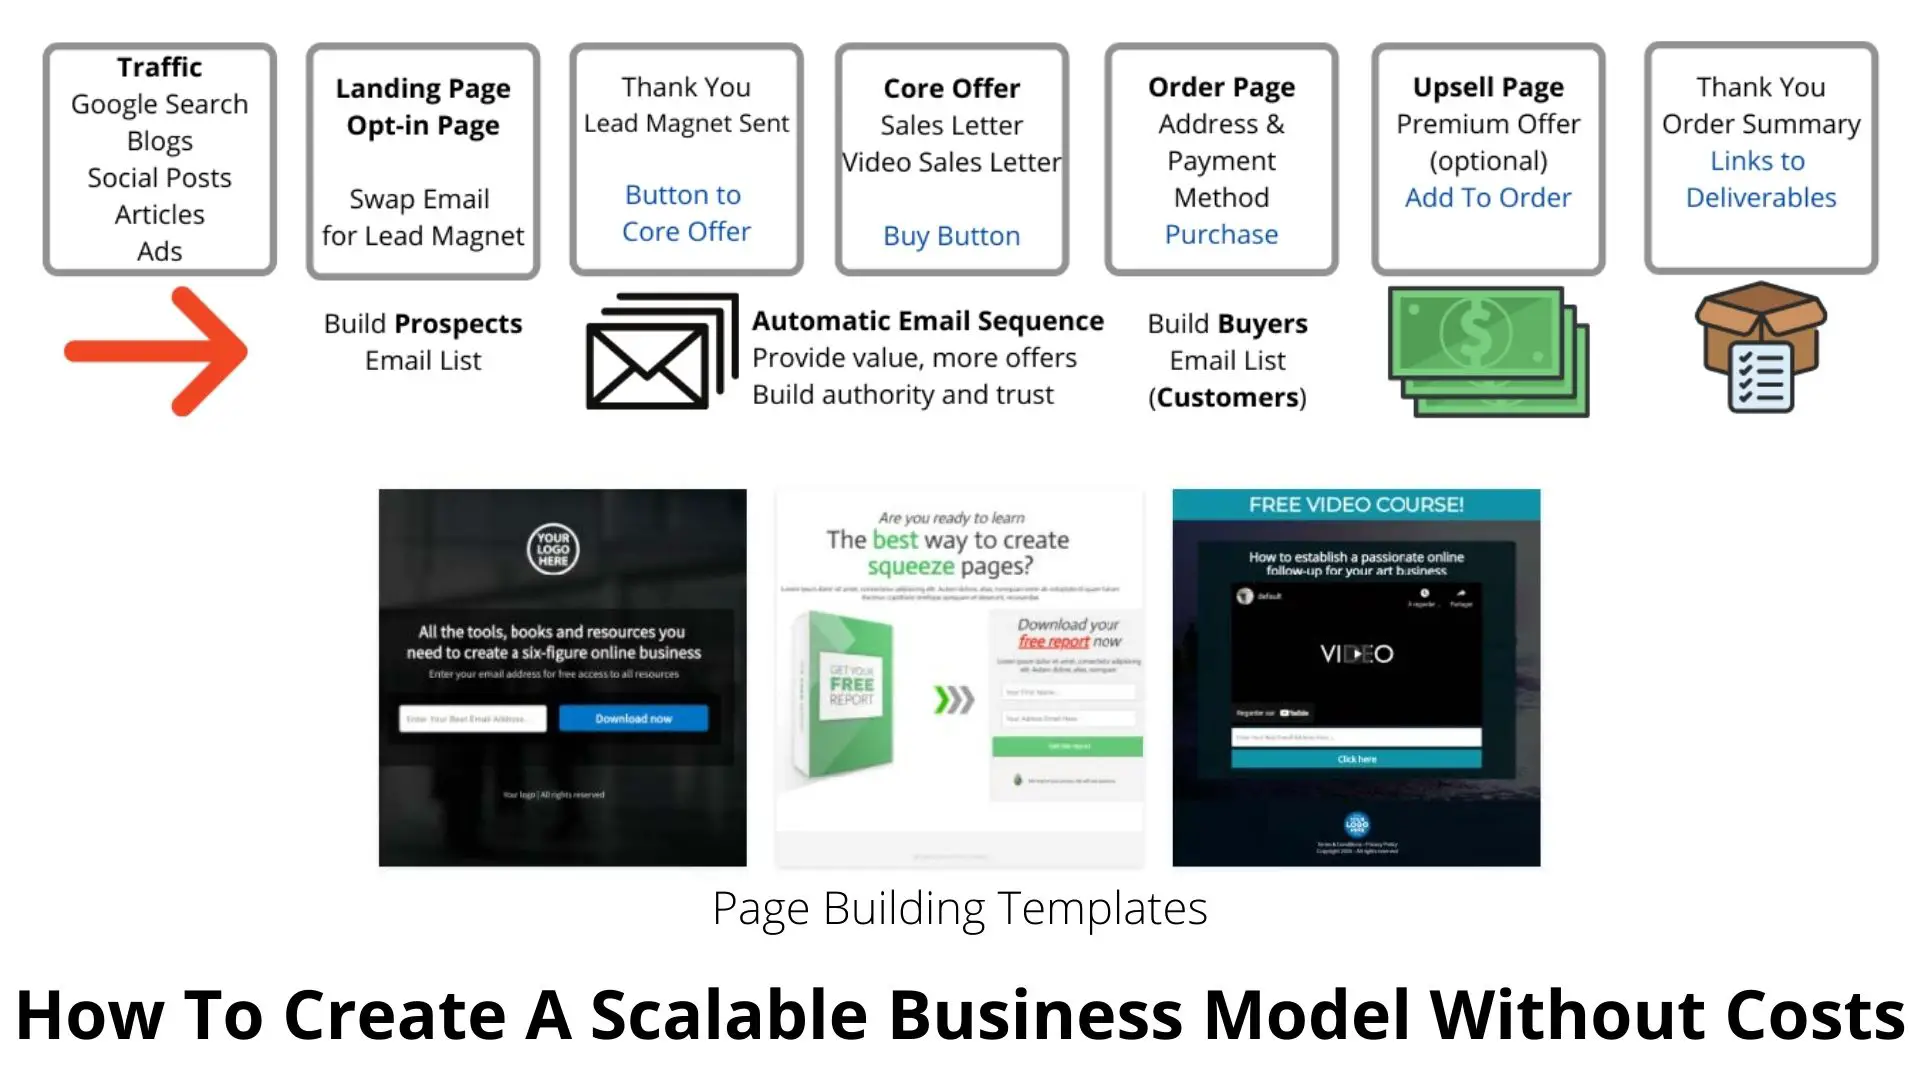 Scalable business model without costs